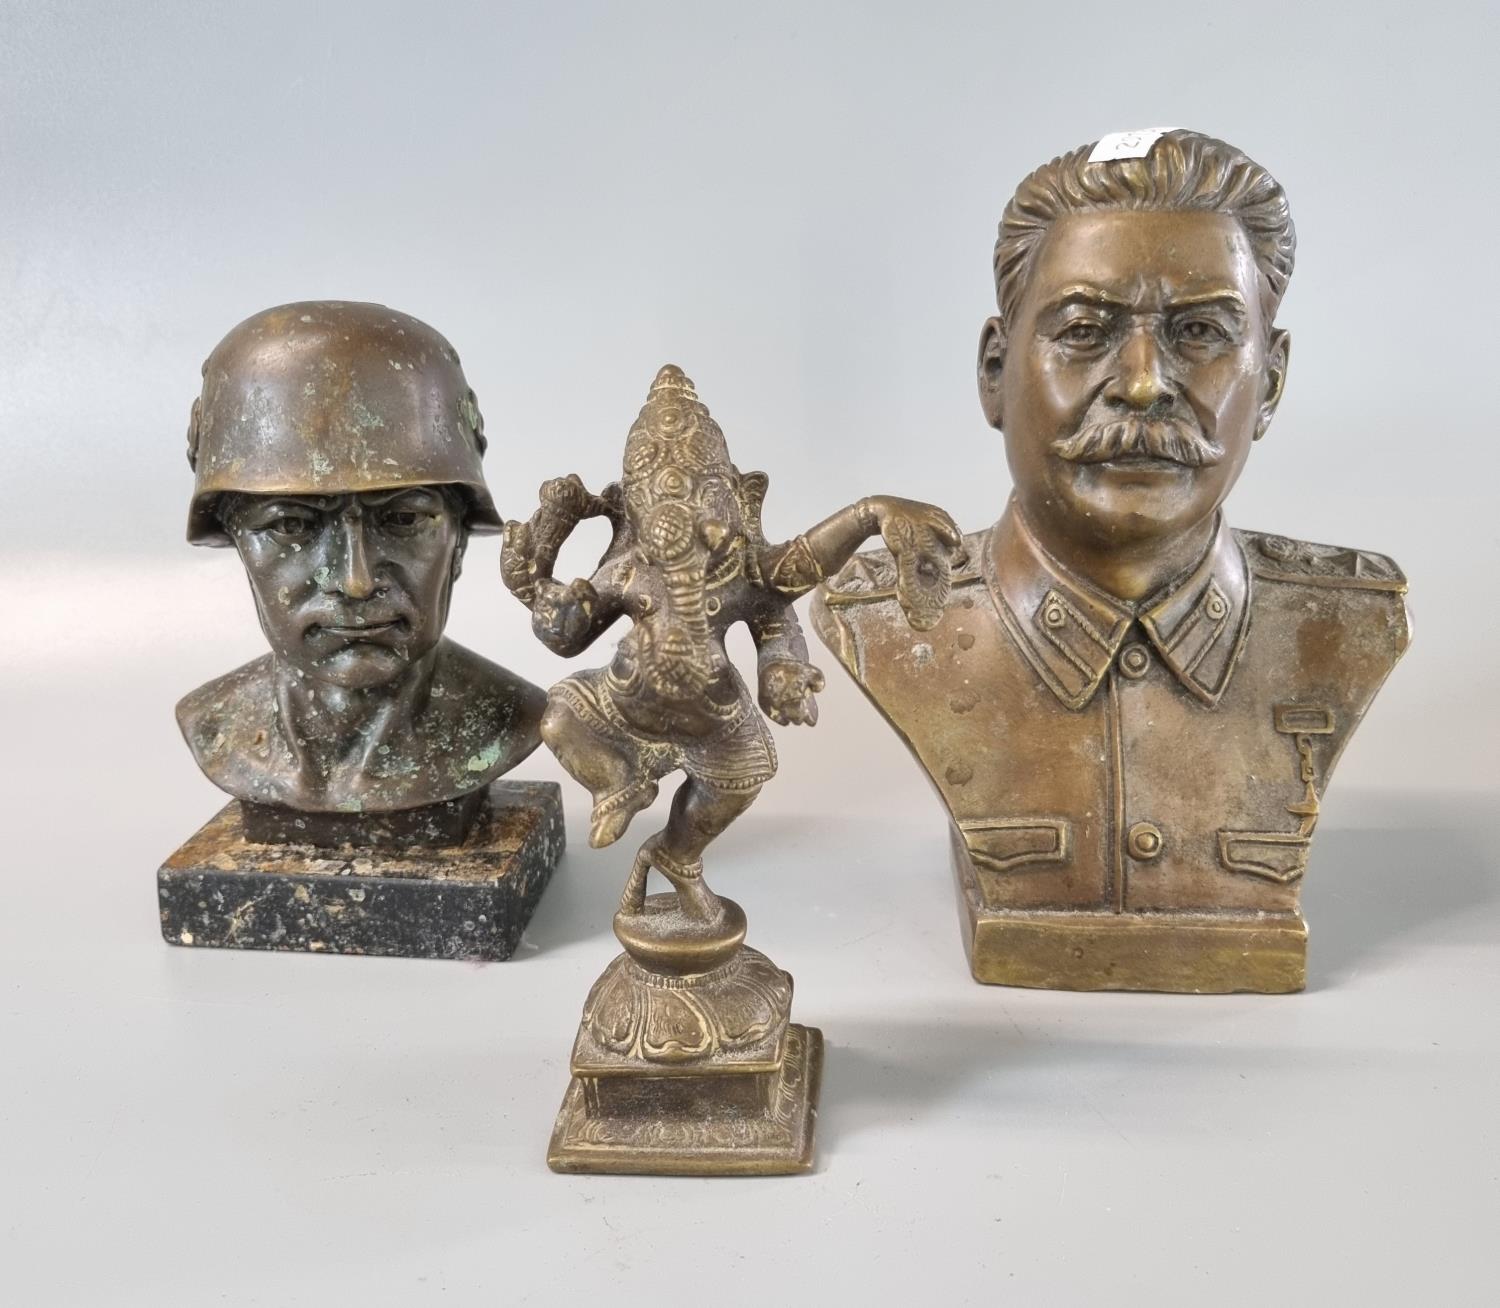 Brass study of Hindu God Ganesh together with a bronzed bust of Soviet Union's Chairman Joseph